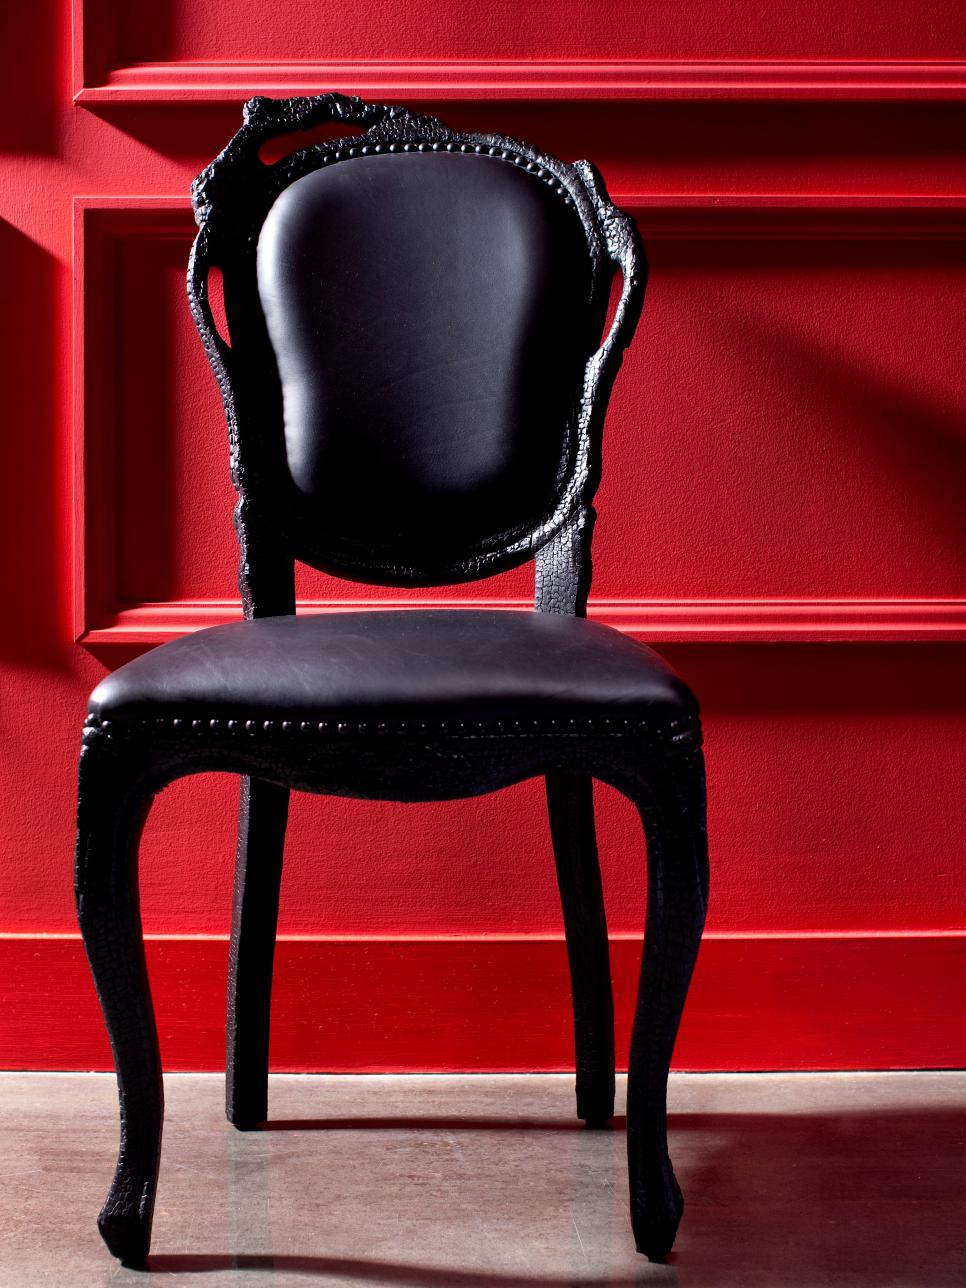 Red Wall and Black Chair